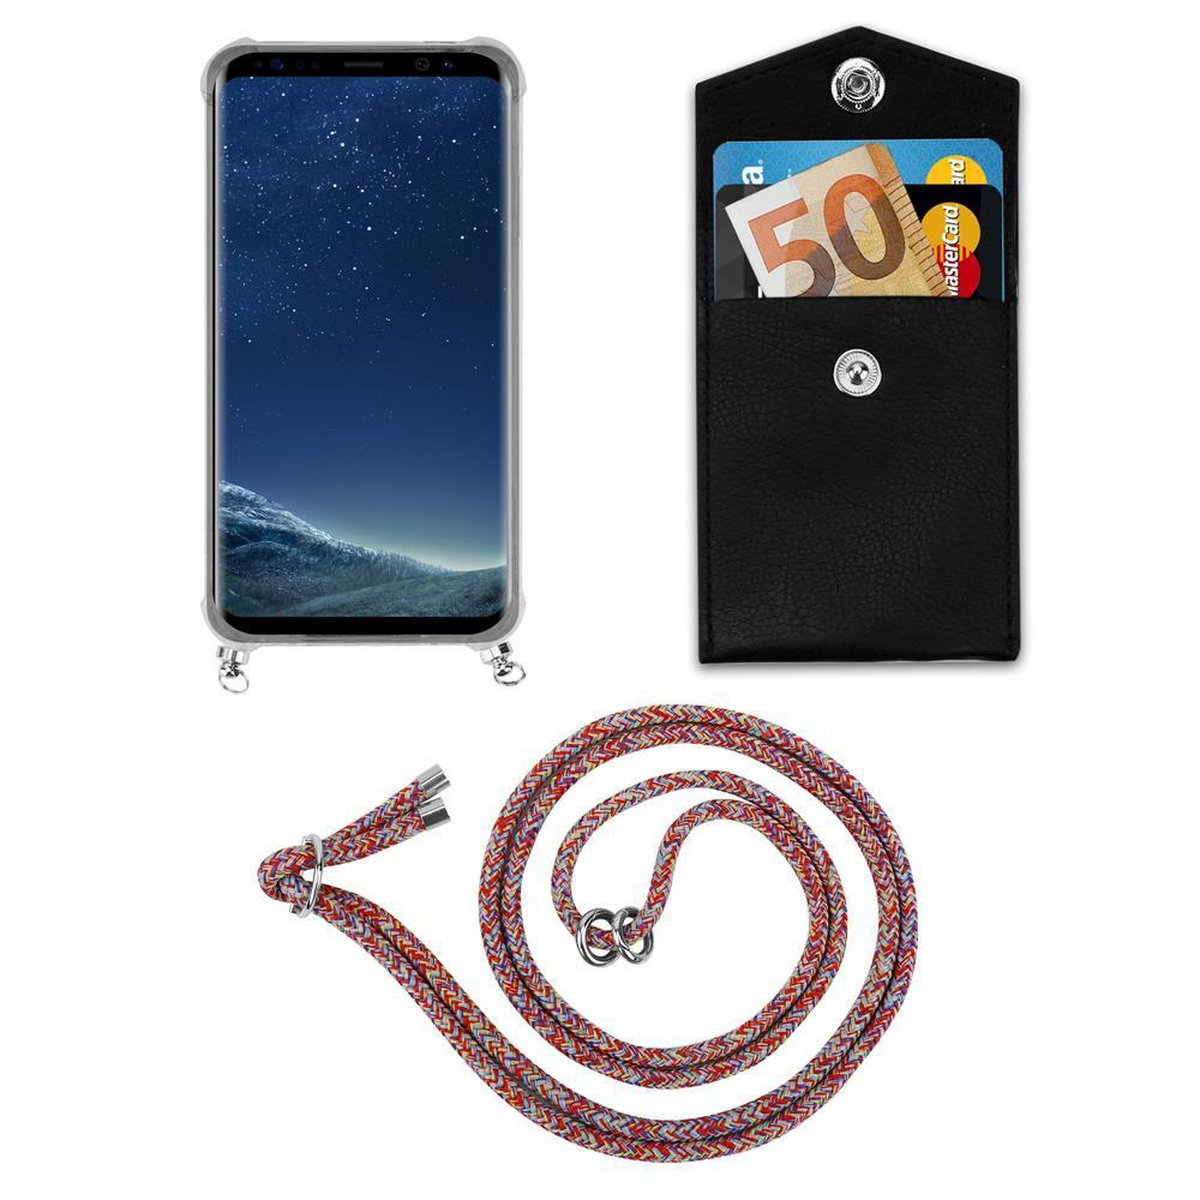 mit Handy CADORABO Kette Silber Hülle, COLORFUL Ringen, PLUS, Galaxy Samsung, Backcover, S8 Kordel und abnehmbarer Band PARROT